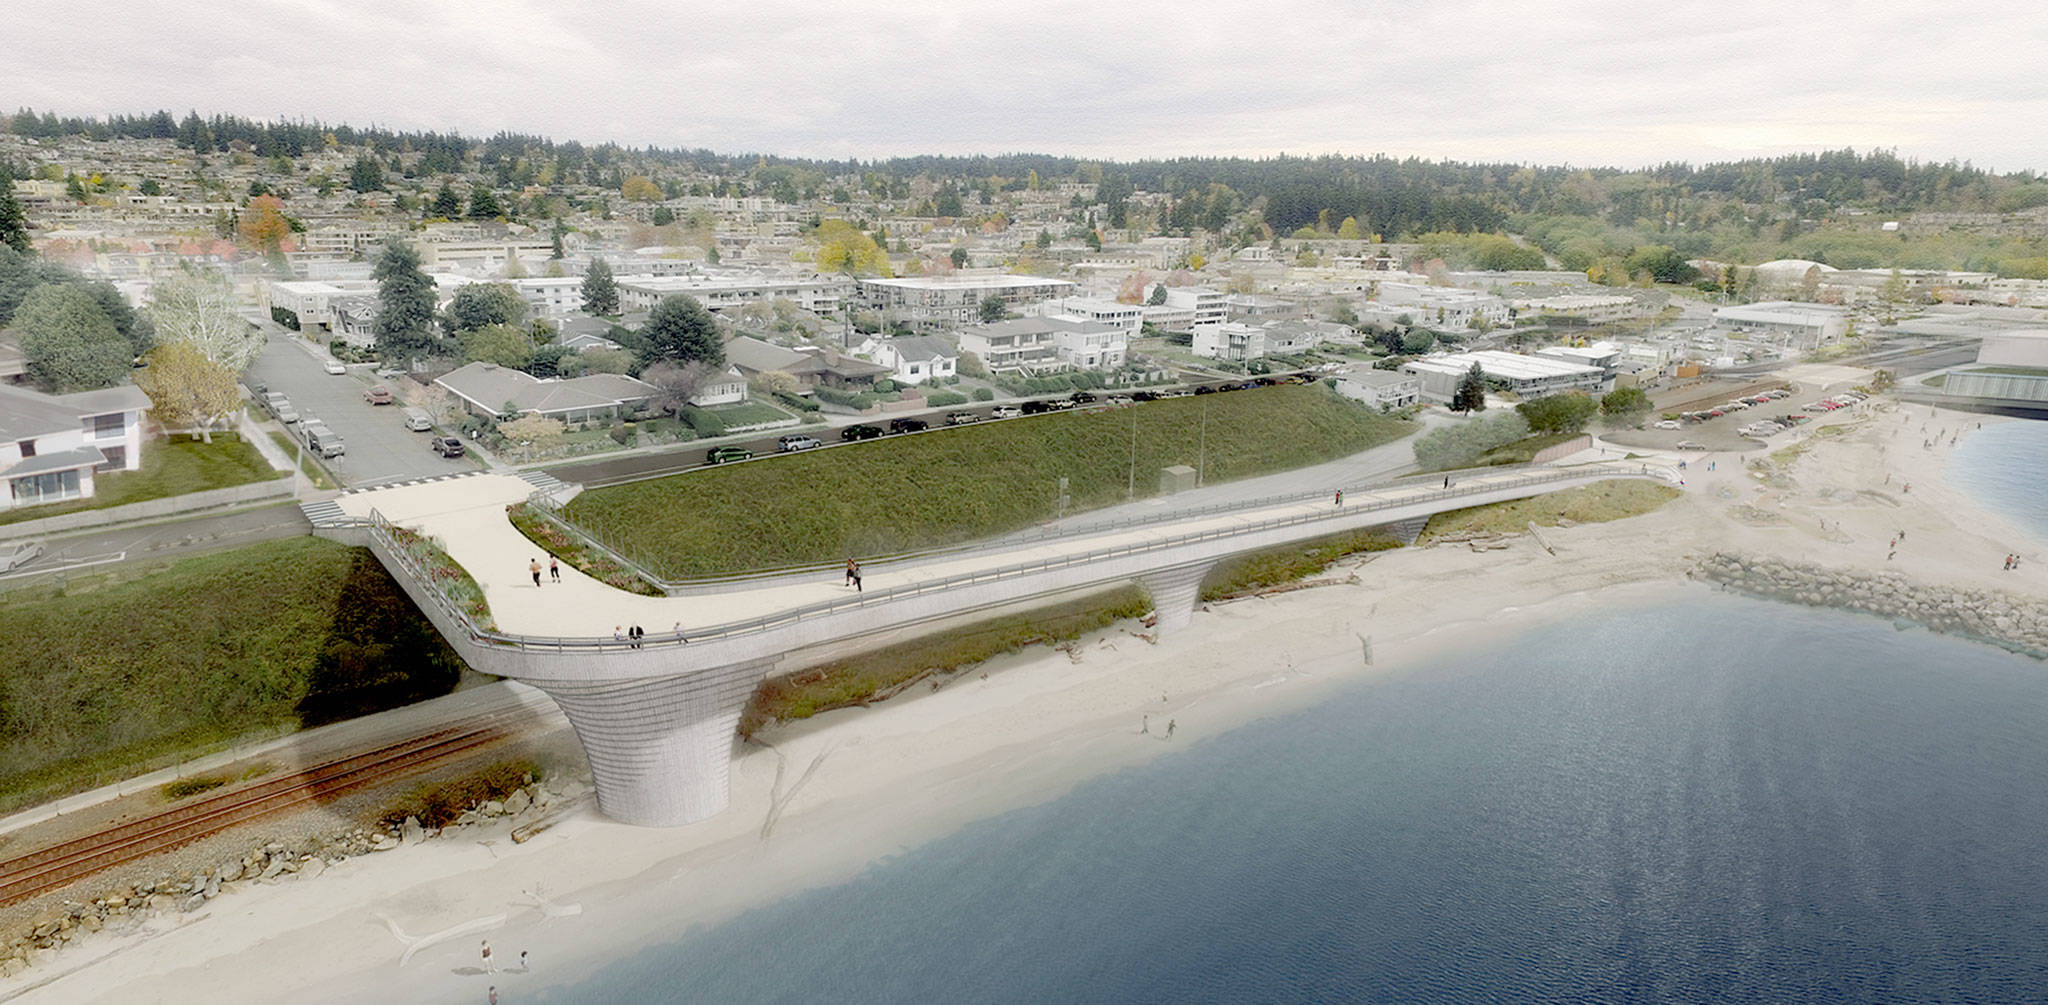 An artist’s conception of the proposed Edmonds waterfront connector. (City of Edmonds)